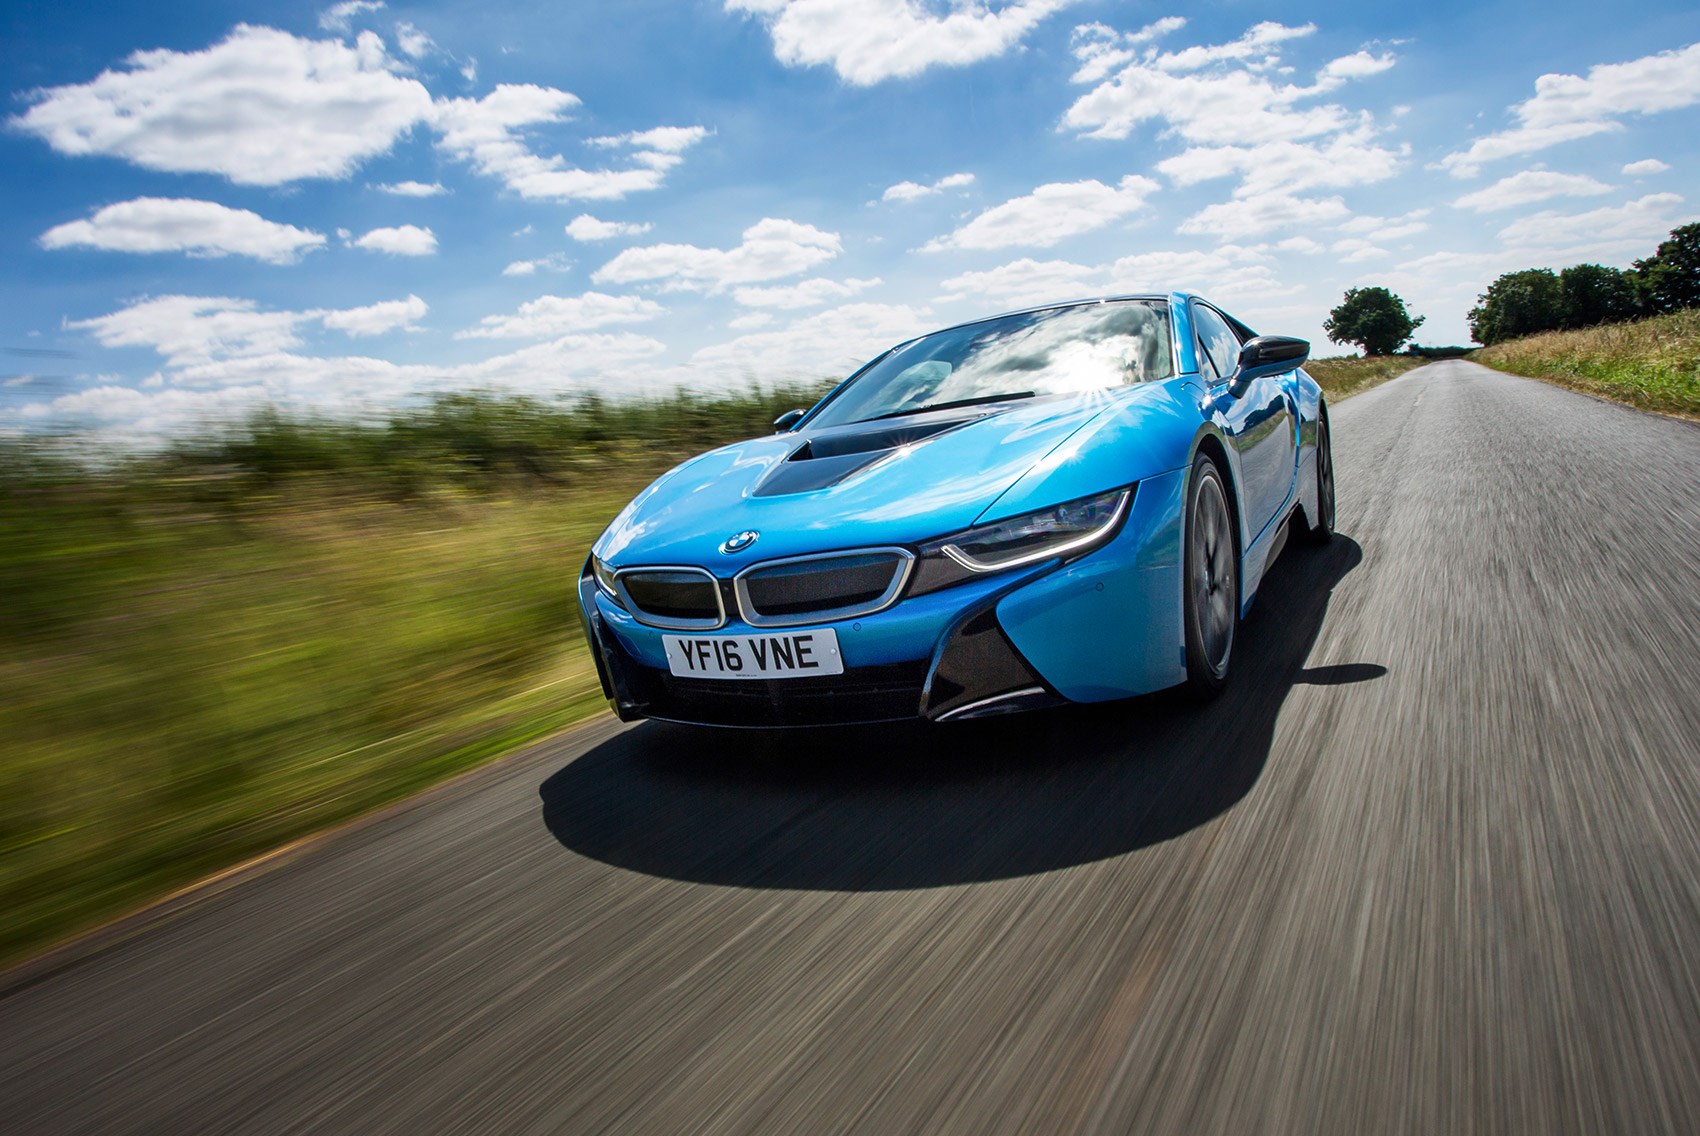 BMW i8 Roadster - eco-friendly travelling & sustainable lifestyle